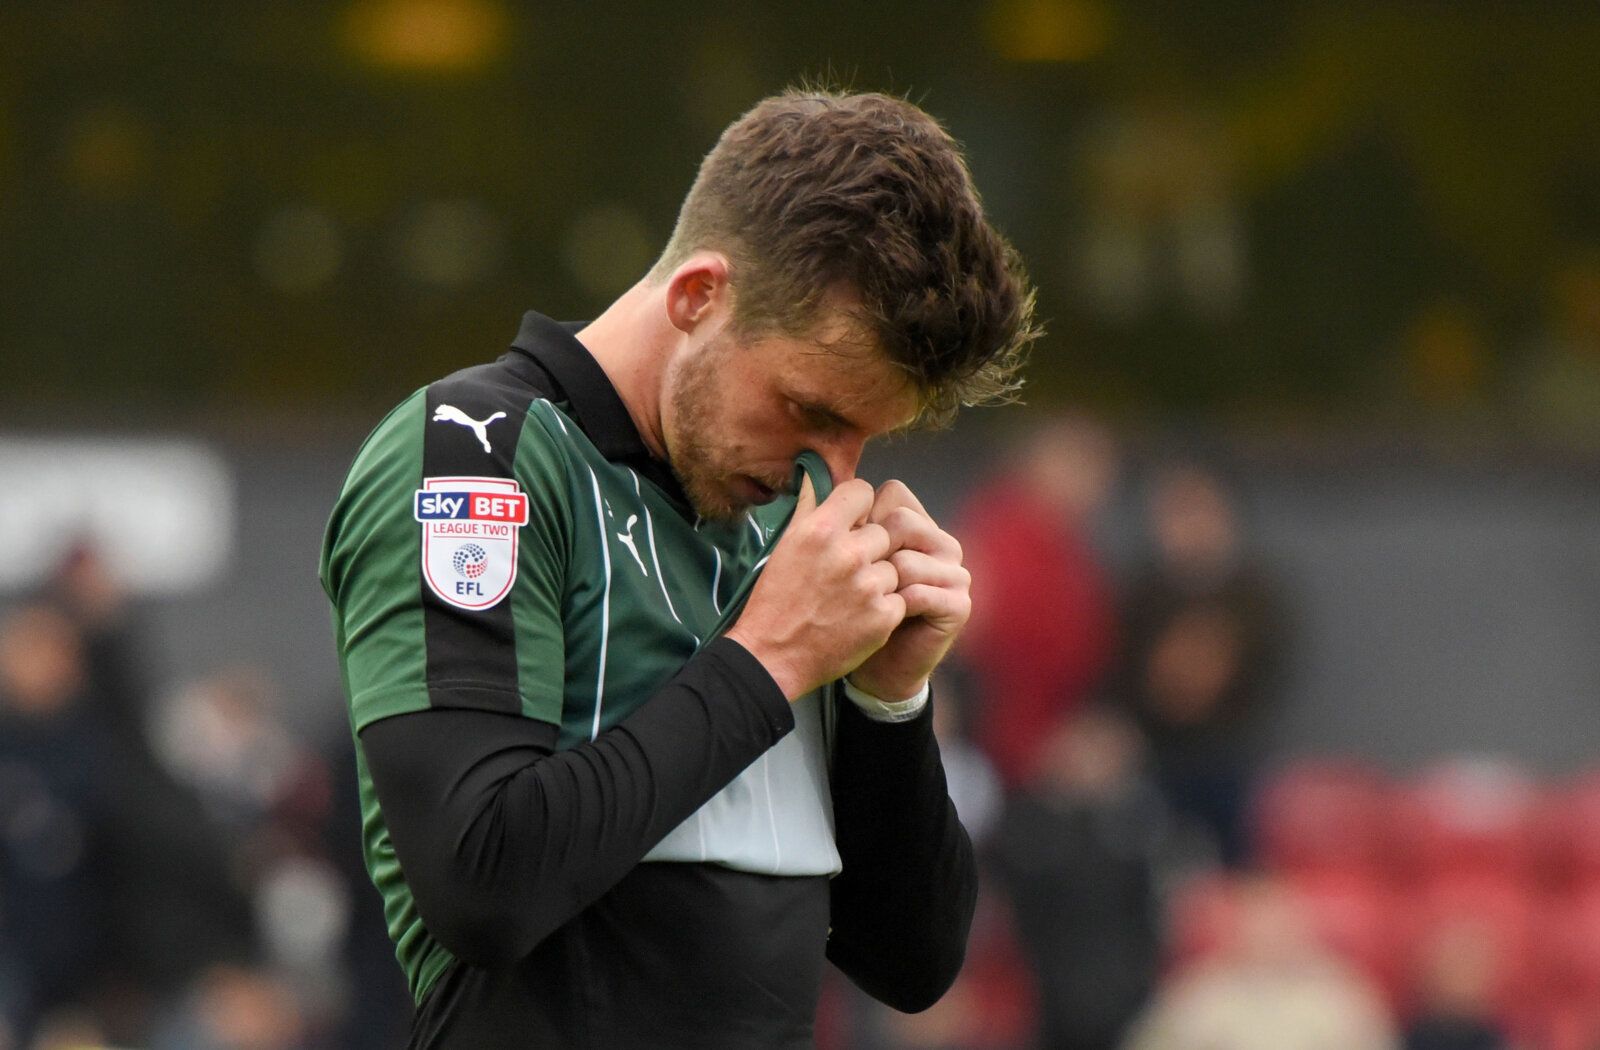 Britain Soccer Football - Grimsby Town v Plymouth Argyle - Sky Bet League Two - Blundell Park - 6/5/17 Plymouth Argyle's Graham Carey dejected after missing out on winning the league Mandatory Credit: Action Images / Paul Burrows Livepic EDITORIAL USE ONLY. No use with unauthorized audio, video, data, fixture lists, club/league logos or 